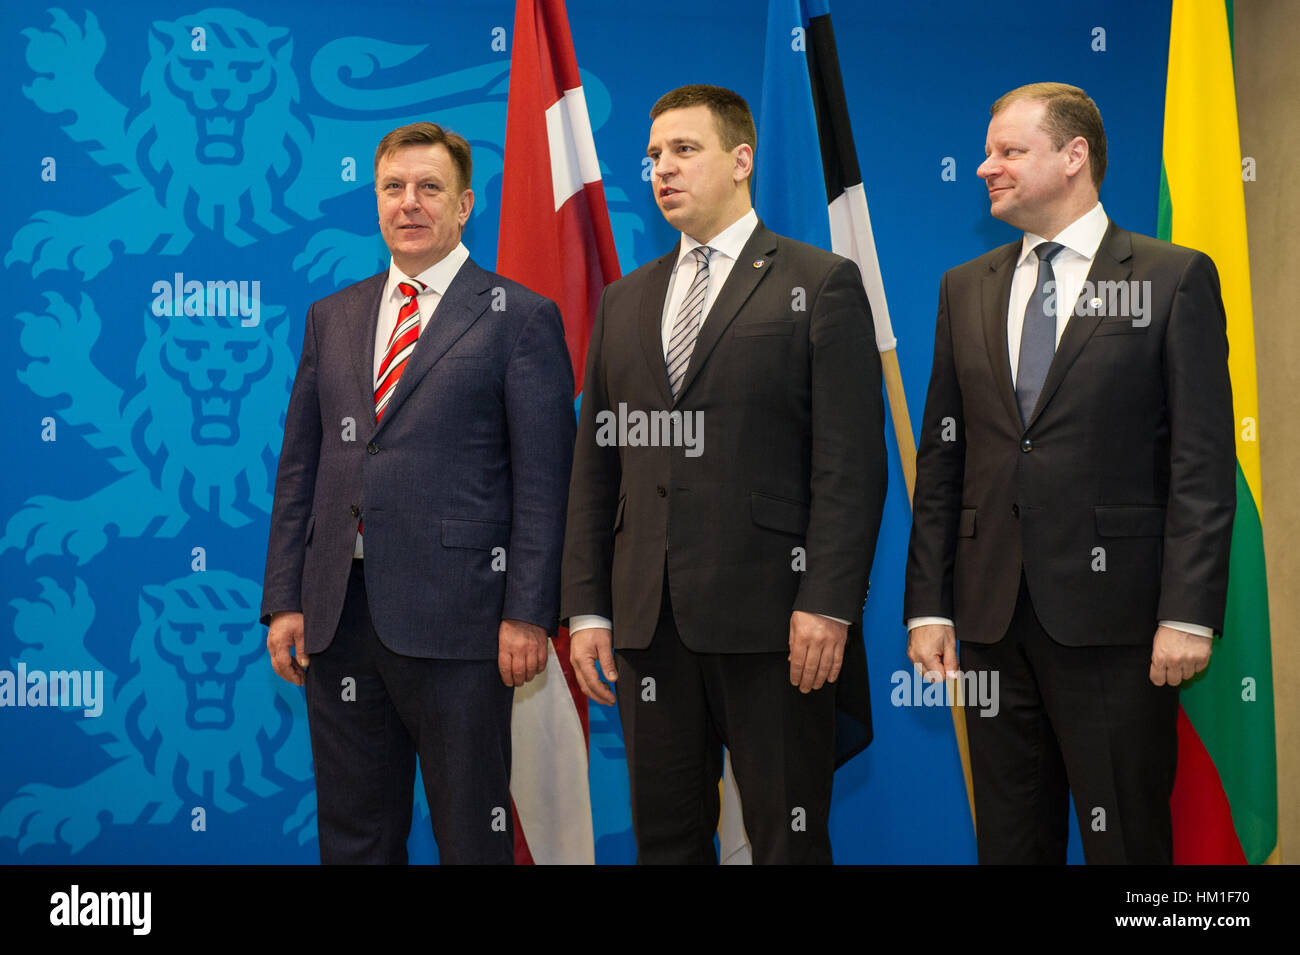 Tallinn, Estonia. 31th January 2017. Estonian Prime Minister Juri Ratas (C), Latvian Prime Minister Maris Kucinskis (L) and Lithuanian Prime Minister Saulius Skvernelis (R) pose for a family photo prior a meeting with the Baltic prime ministers. The three Baltic prime ministers meet today to discuss on regional security, energy and transport links, as well as the future of the European Union. Nicolas Bouvy/Alamy Live News Stock Photo